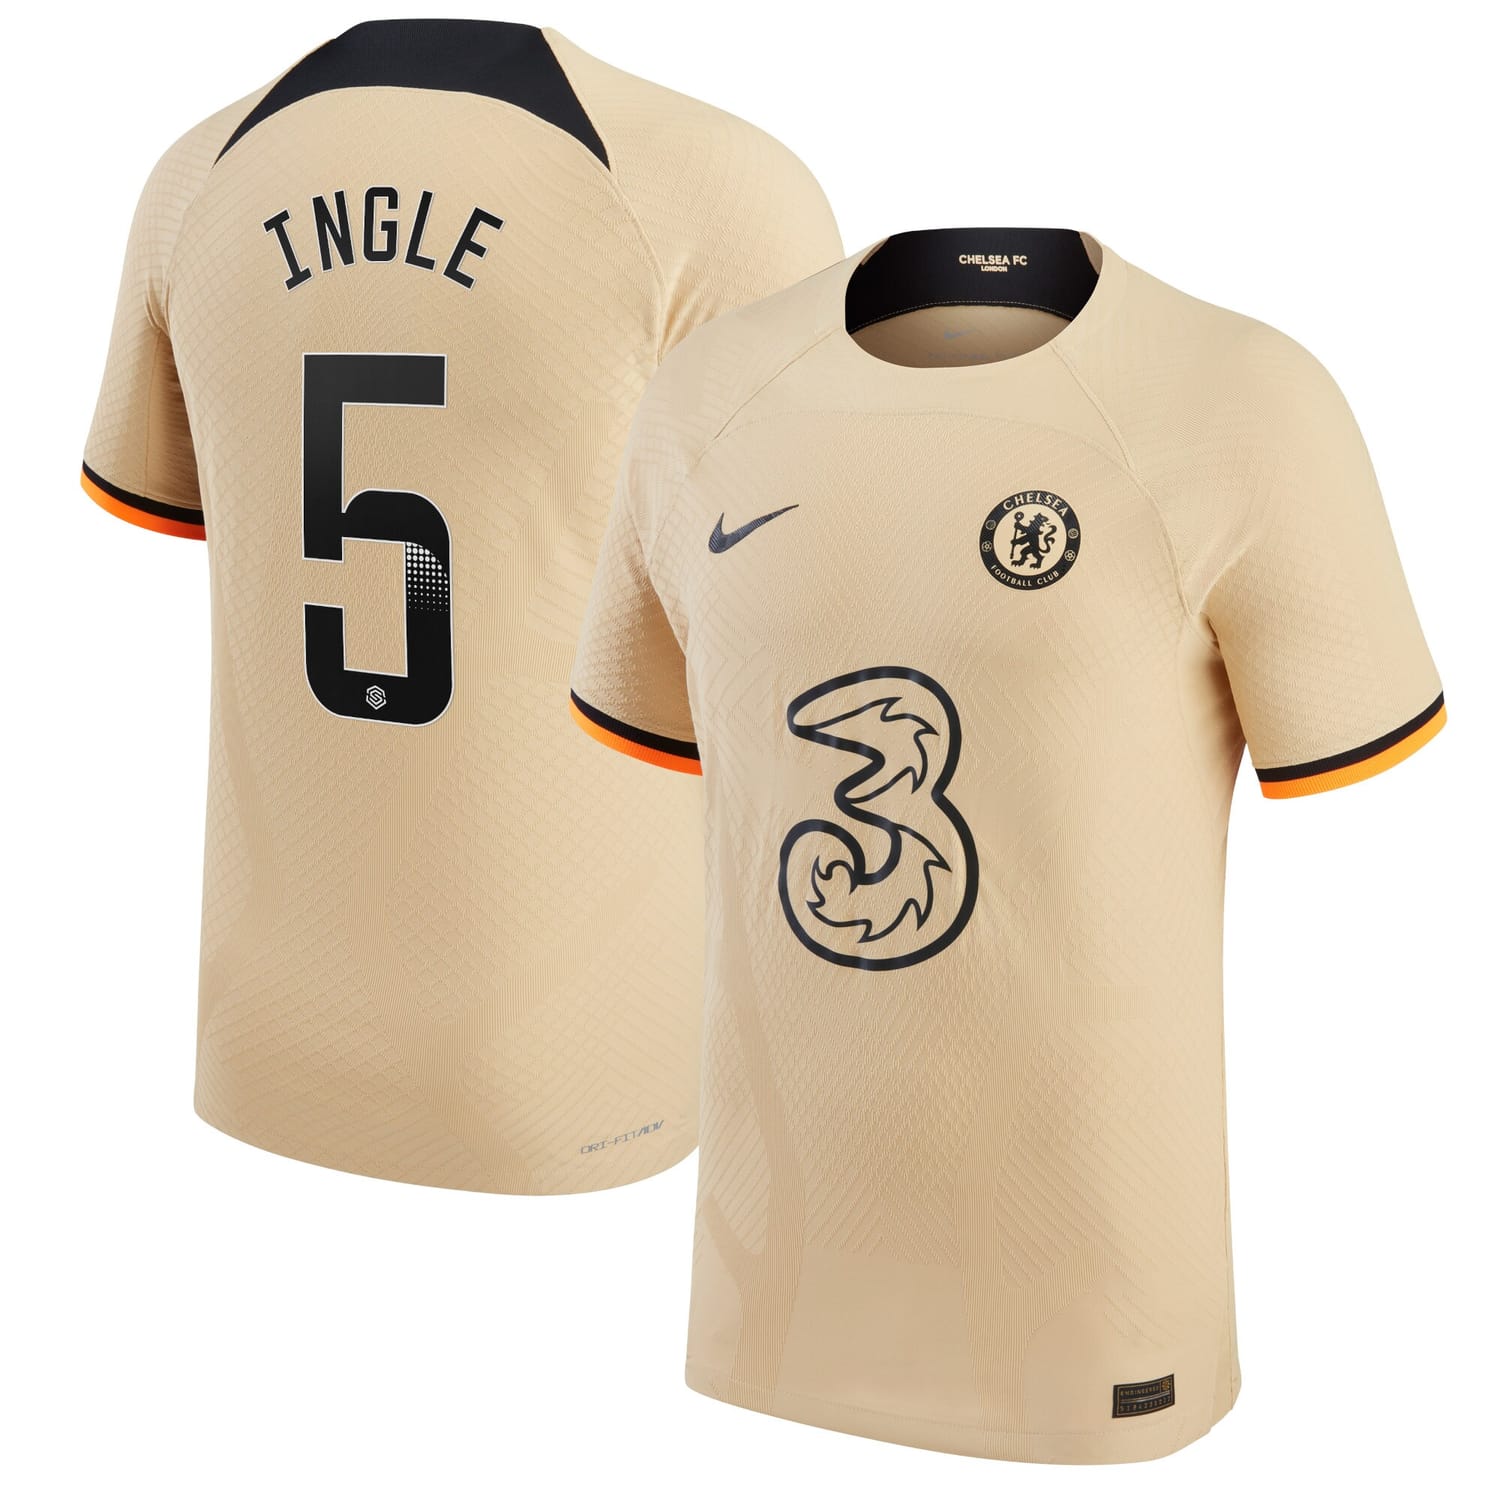 Premier League Chelsea Third WSL Authentic Jersey Shirt 2022-23 player Sophie Ingle 5 printing for Men